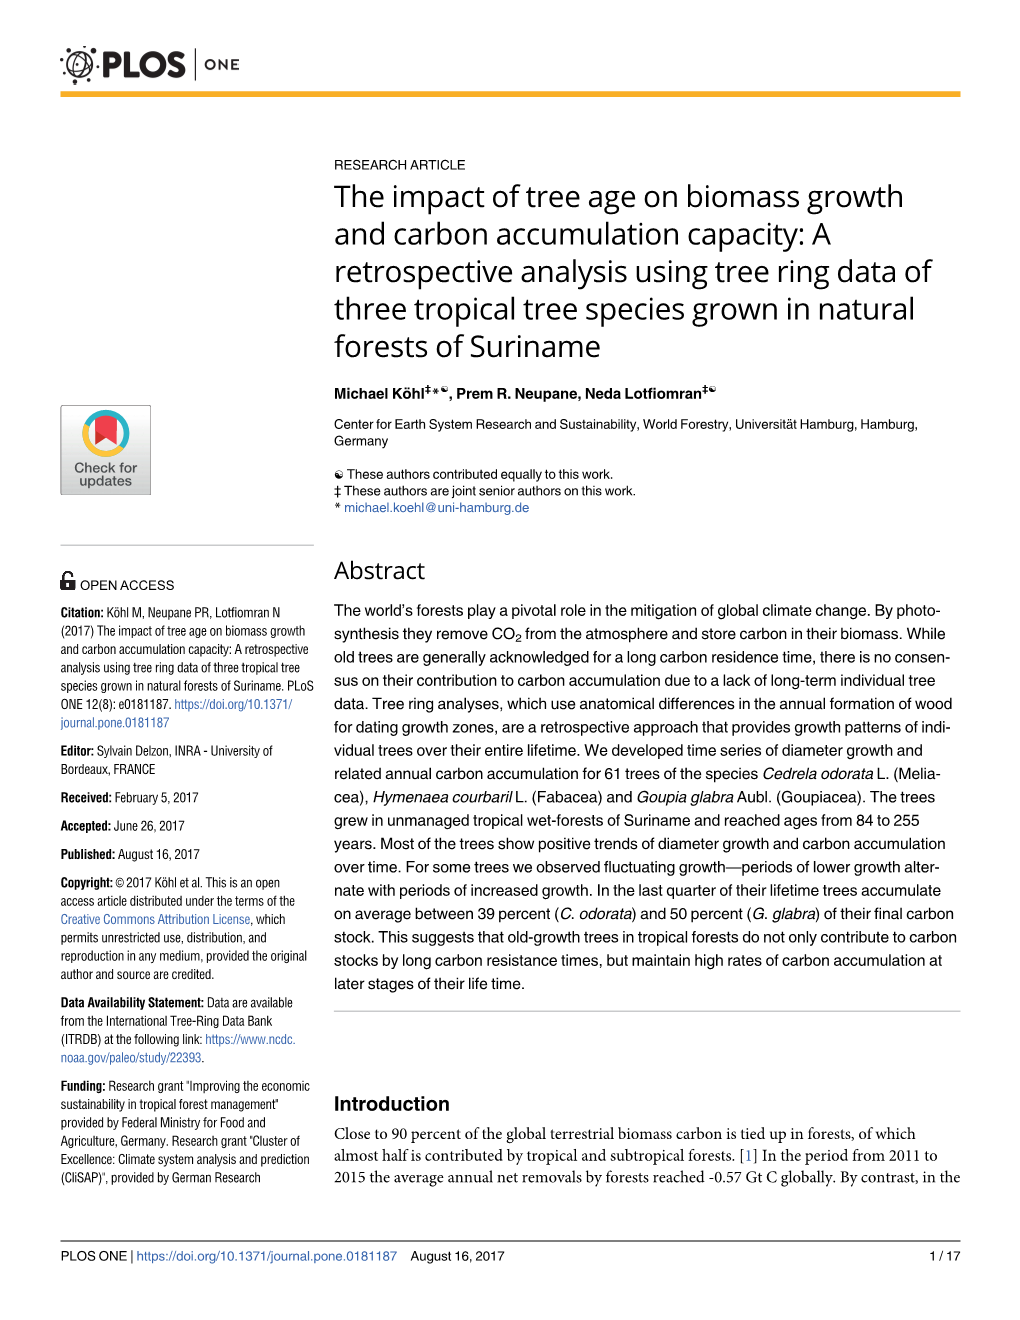 The Impact of Tree Age on Biomass Growth and Carbon Accumulation